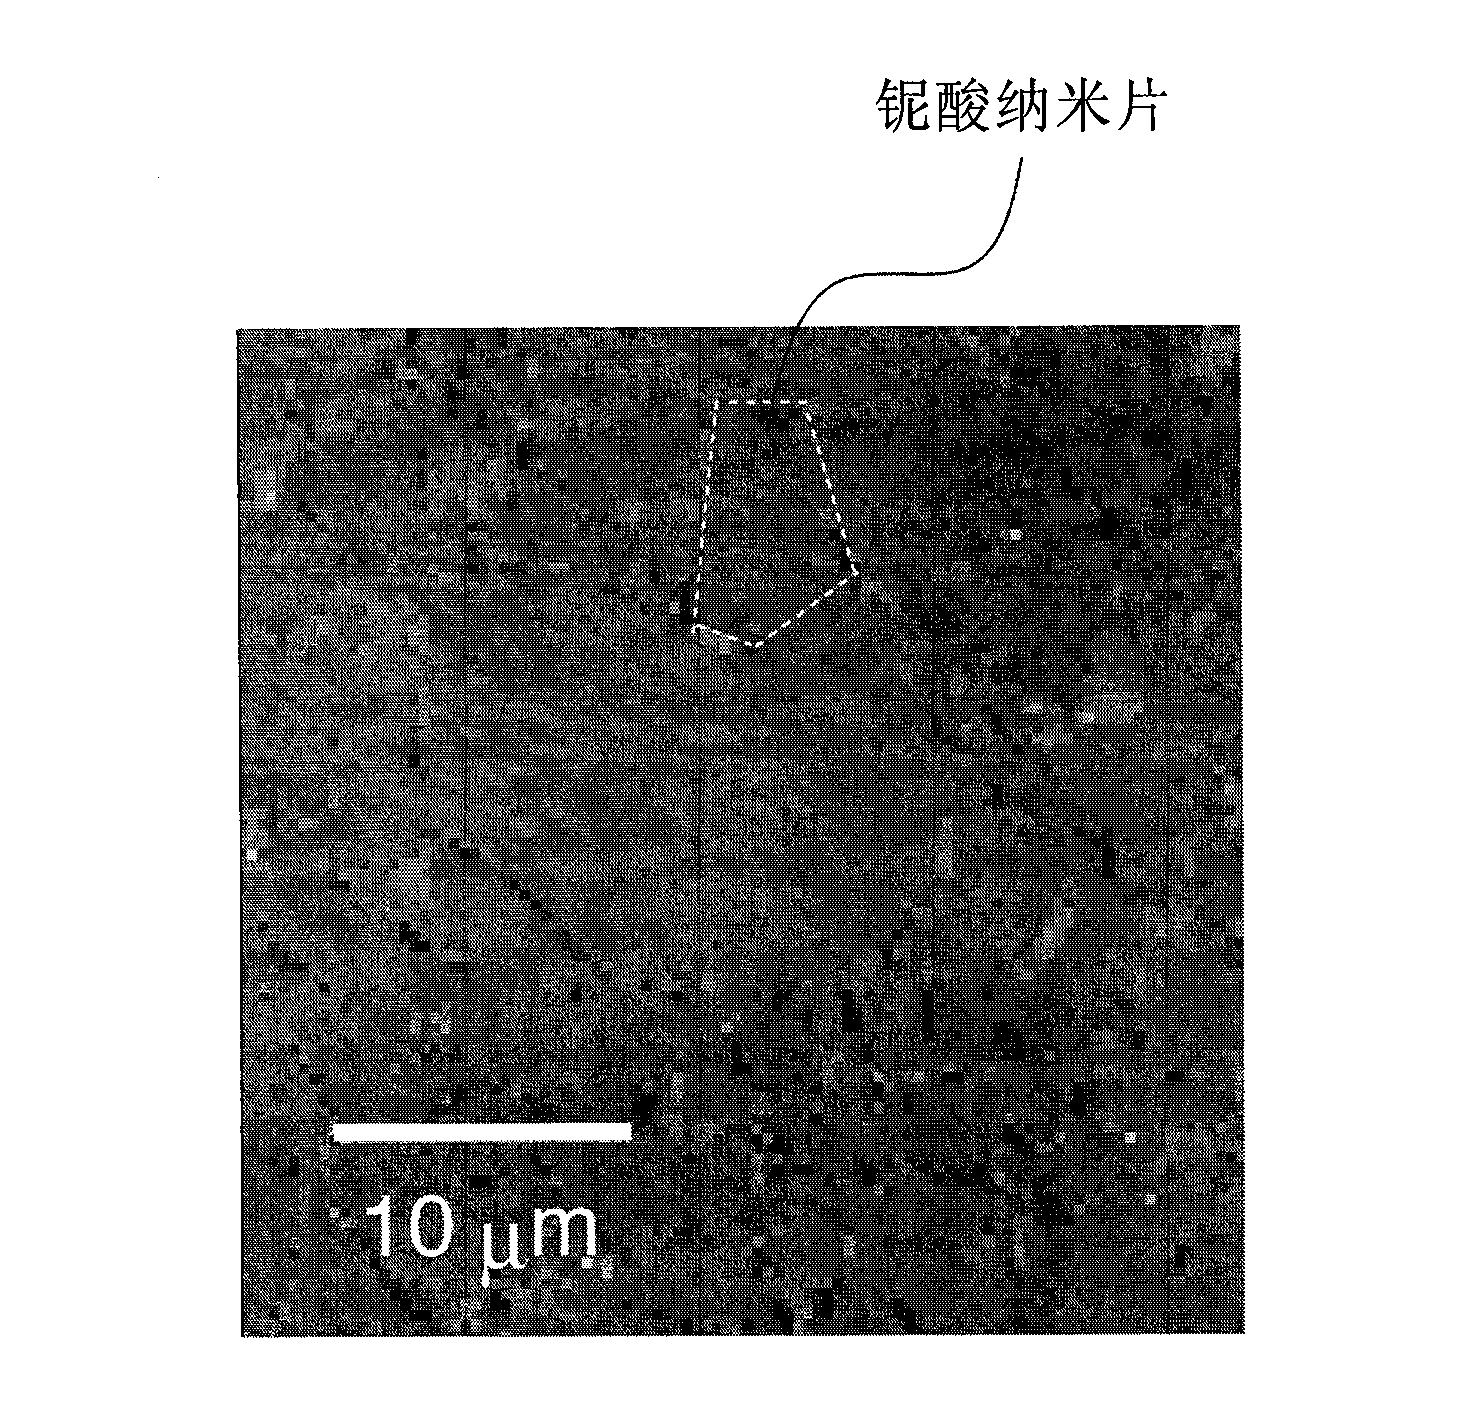 Dielectric film, dielectric element, and process for producing the dielectric element